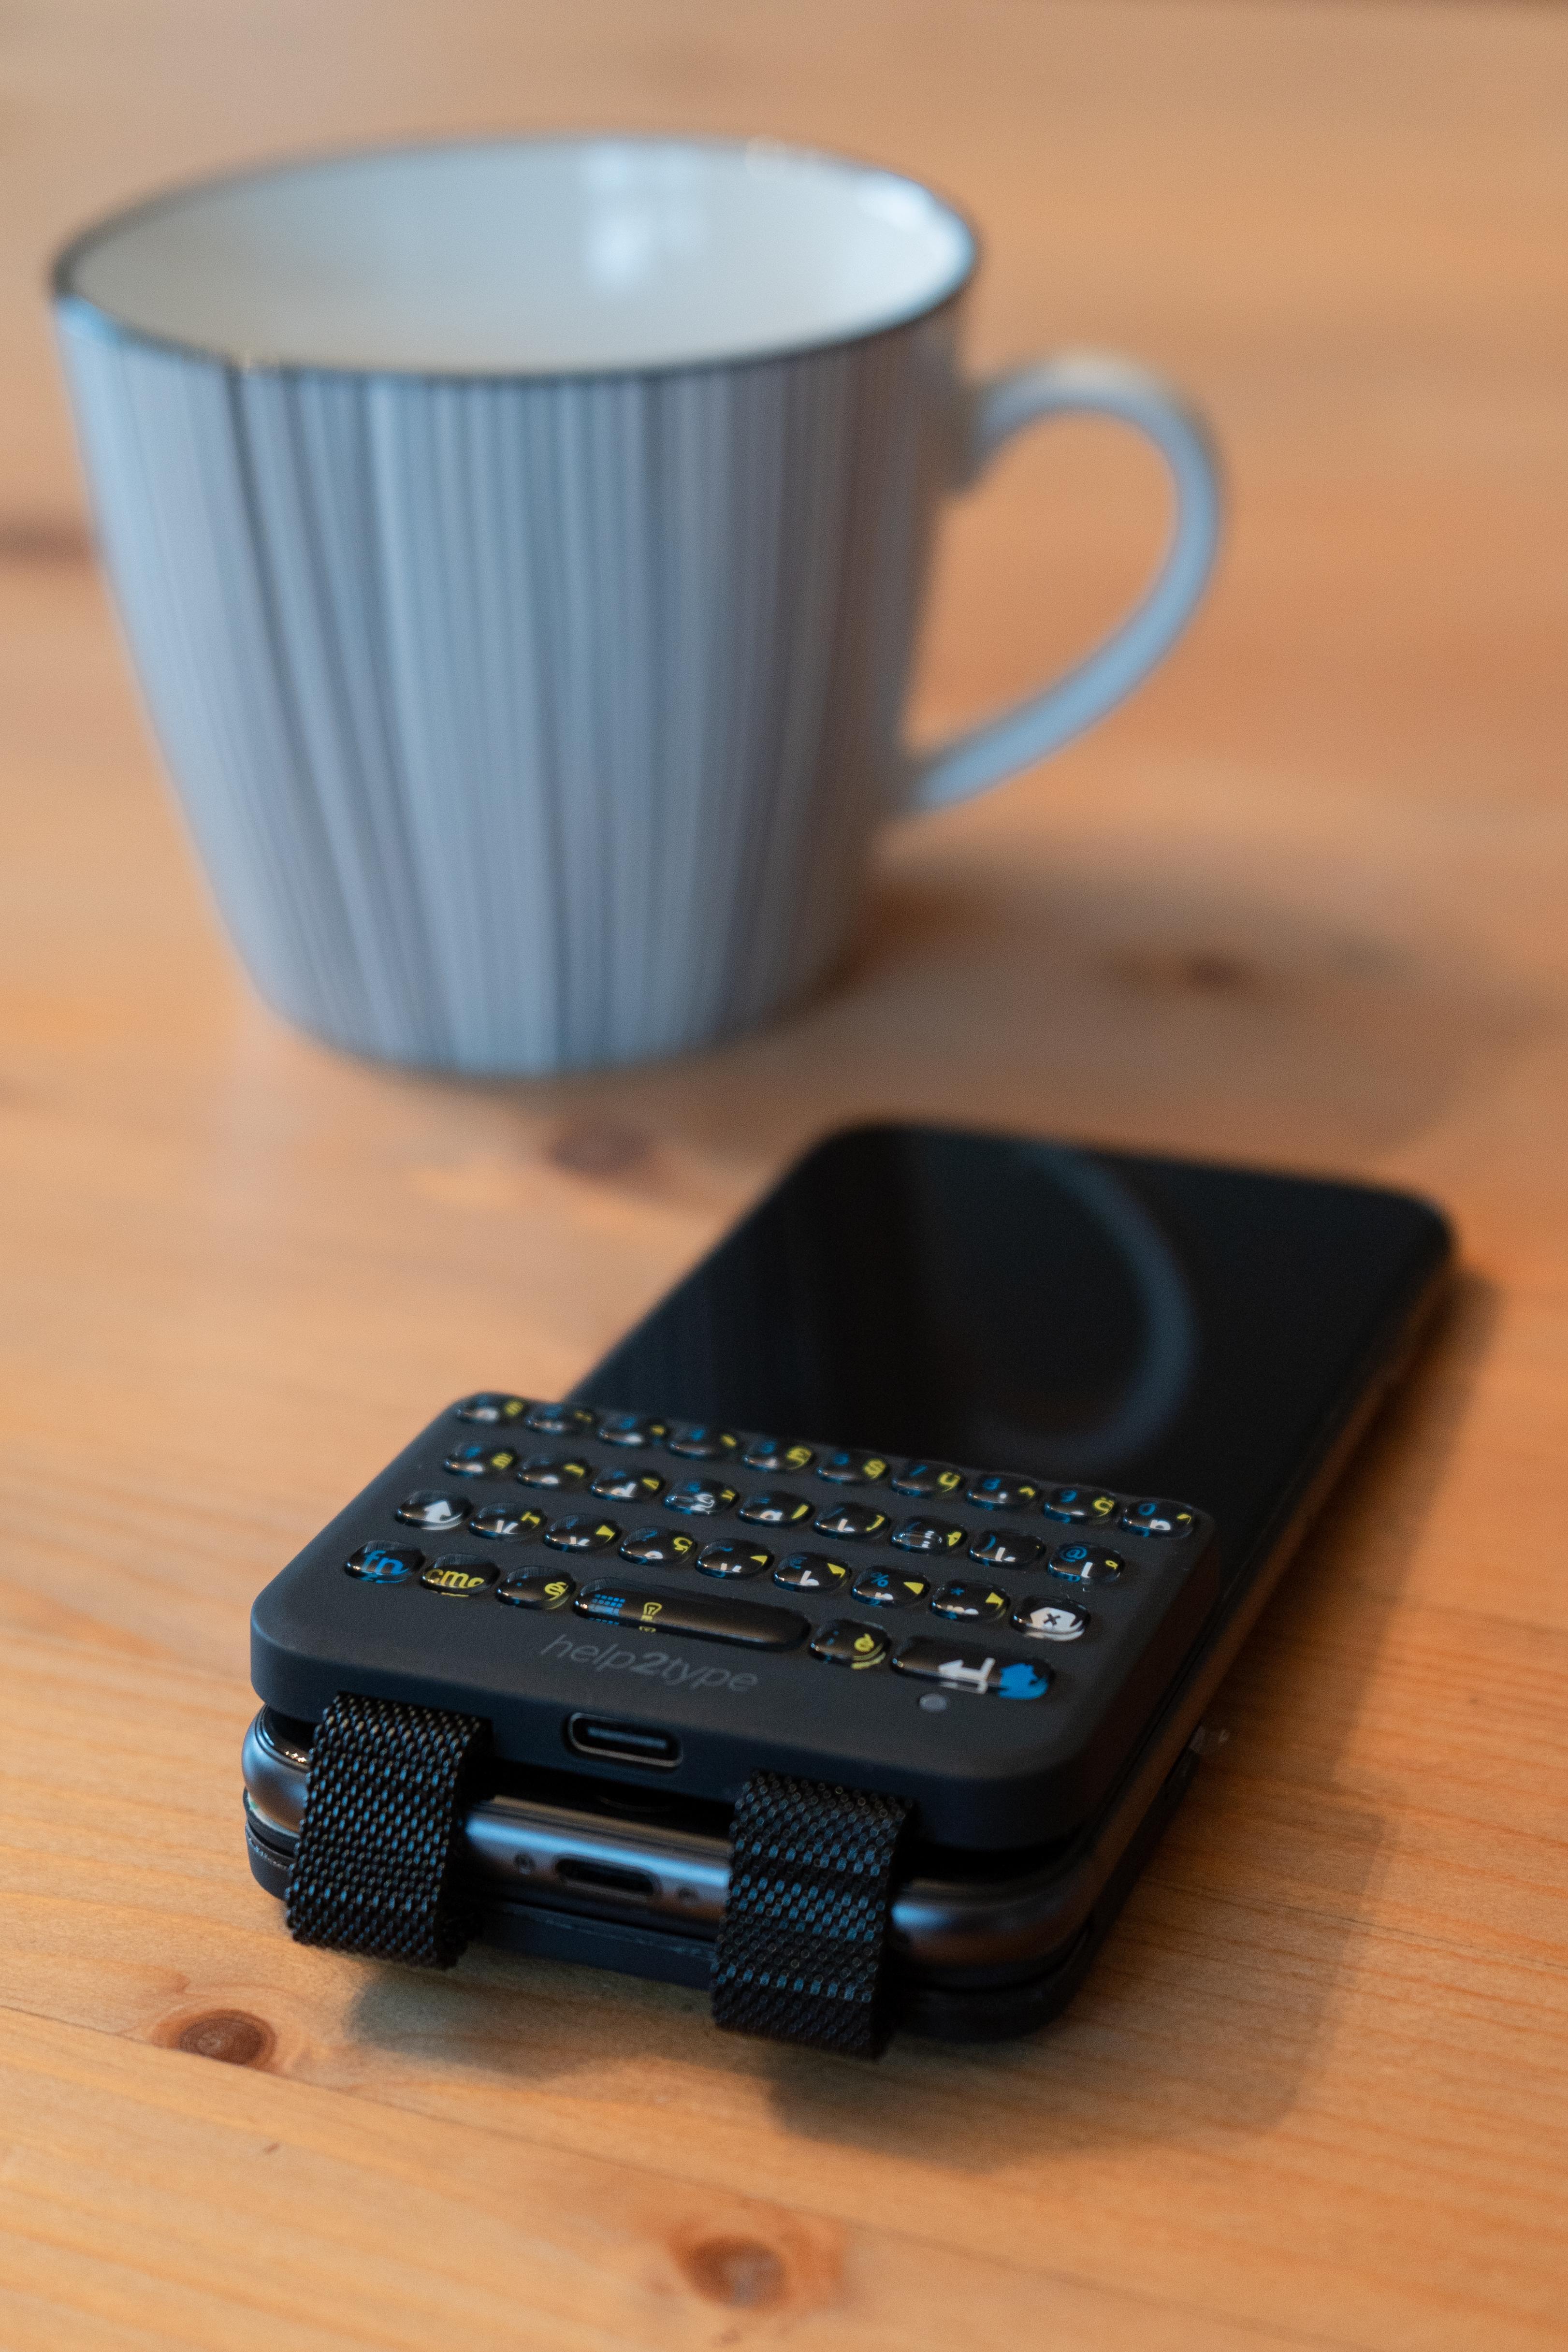 help2type keyboard on a smartphone placed on a table next to the phone is a blue mug